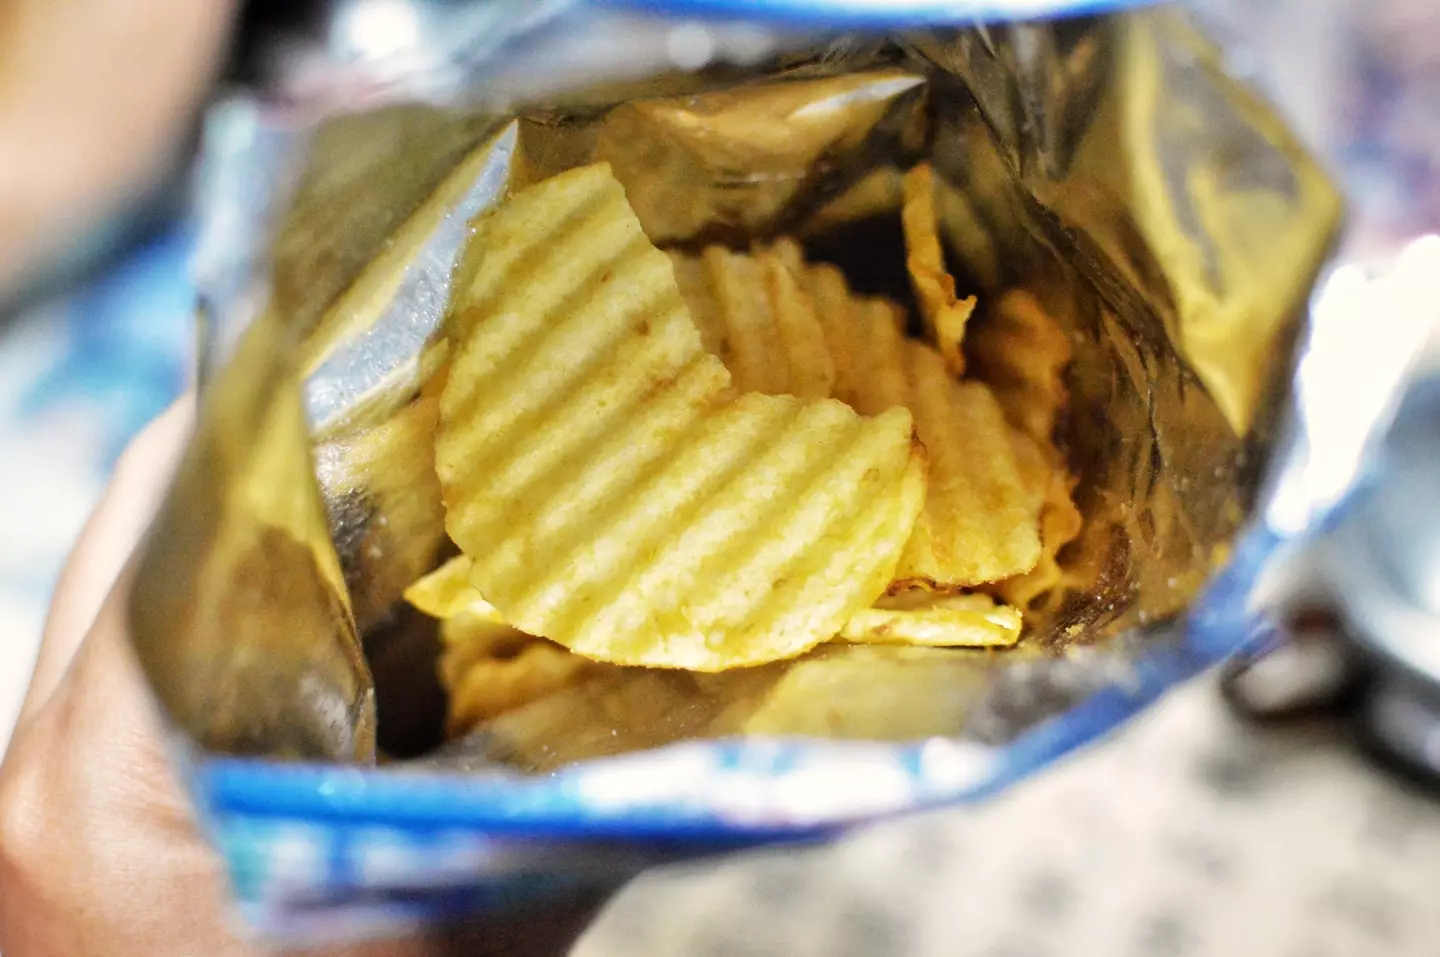 The woman fumed about her crisps packet. (Getty stock image)